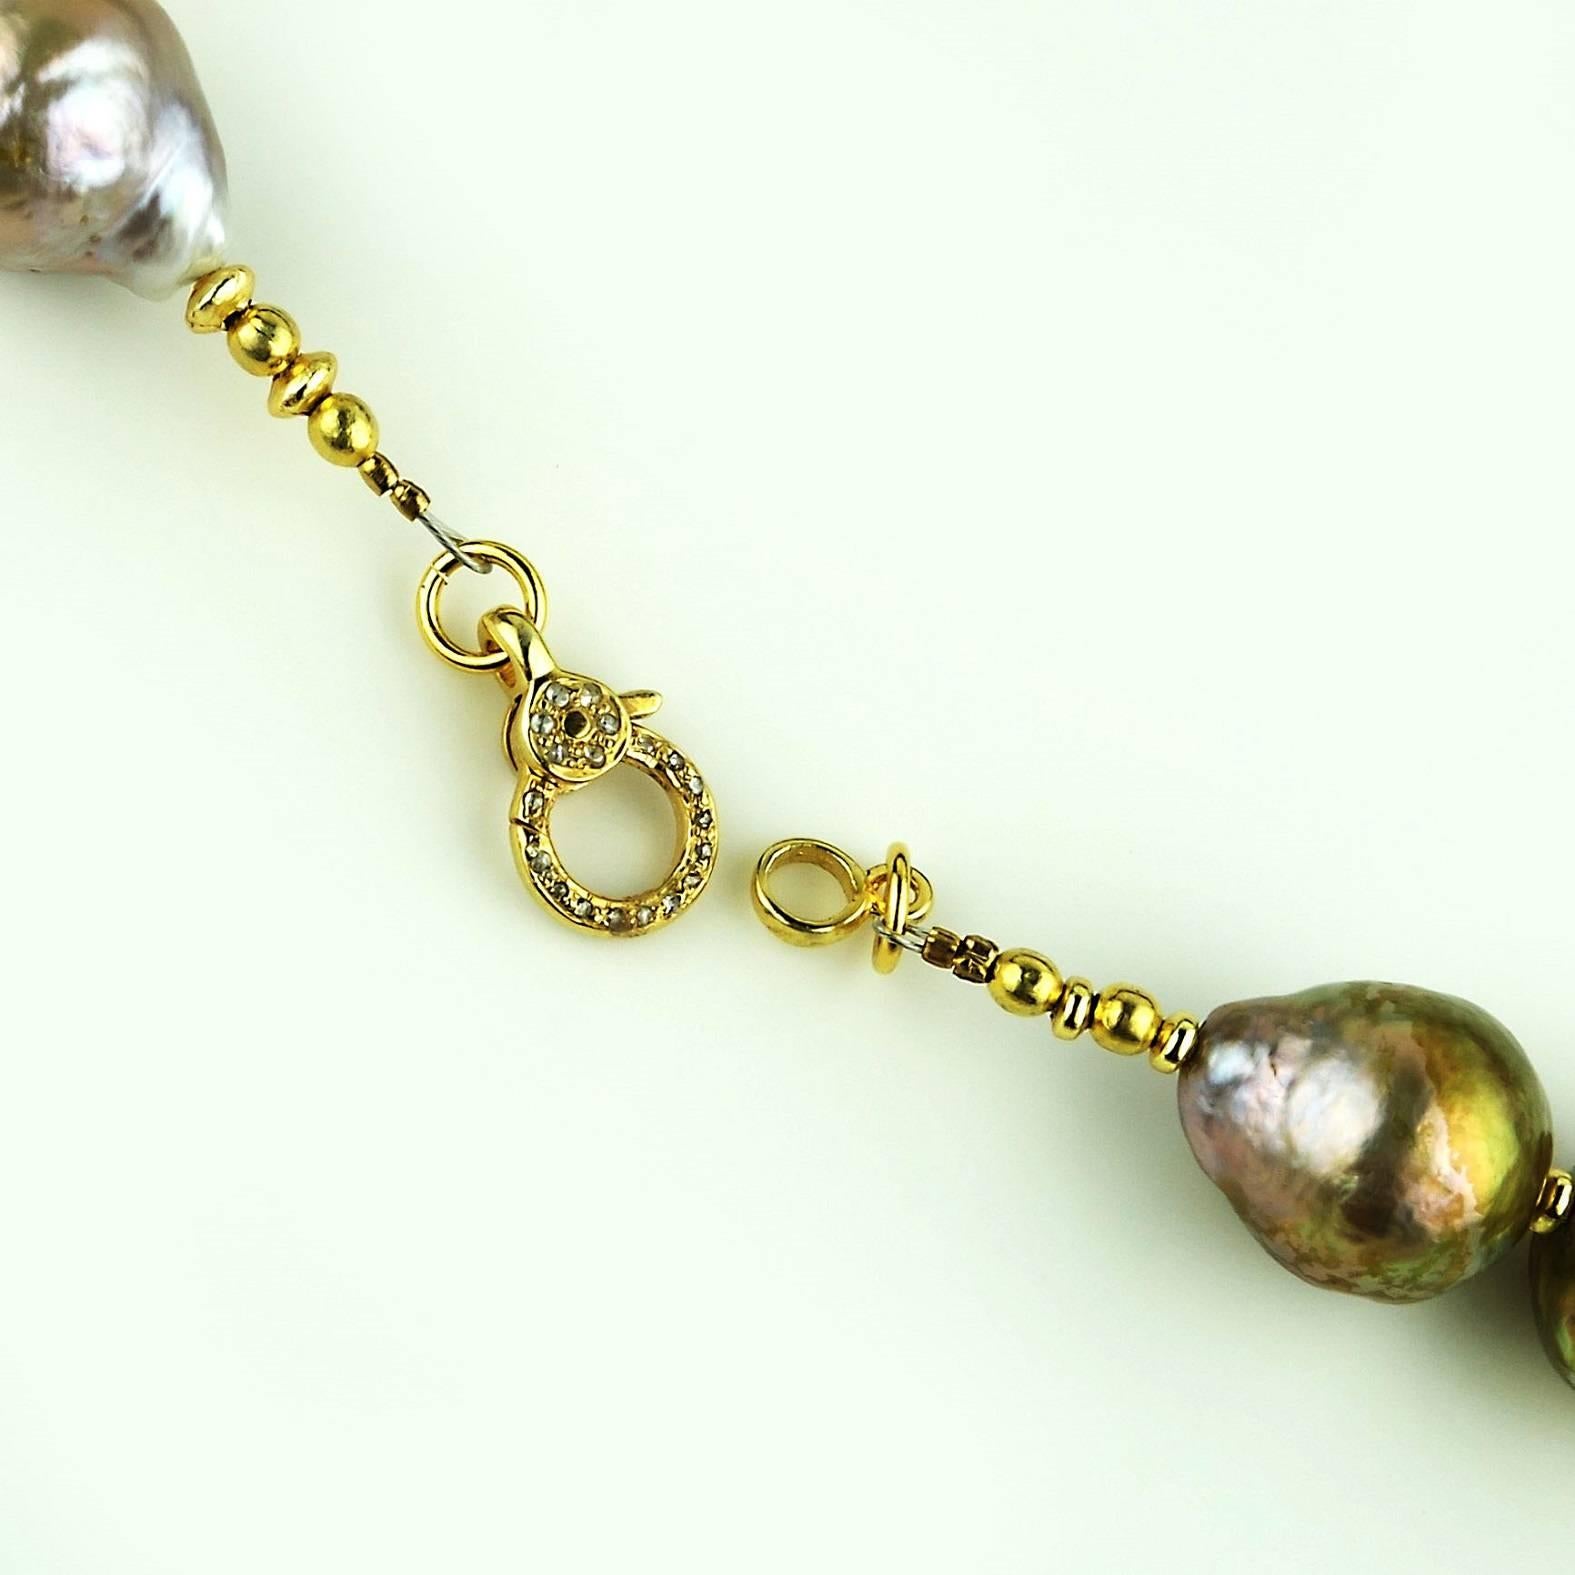 Glamorous Iridescent Wrinkle Pearl Necklace from Gemjunky 4